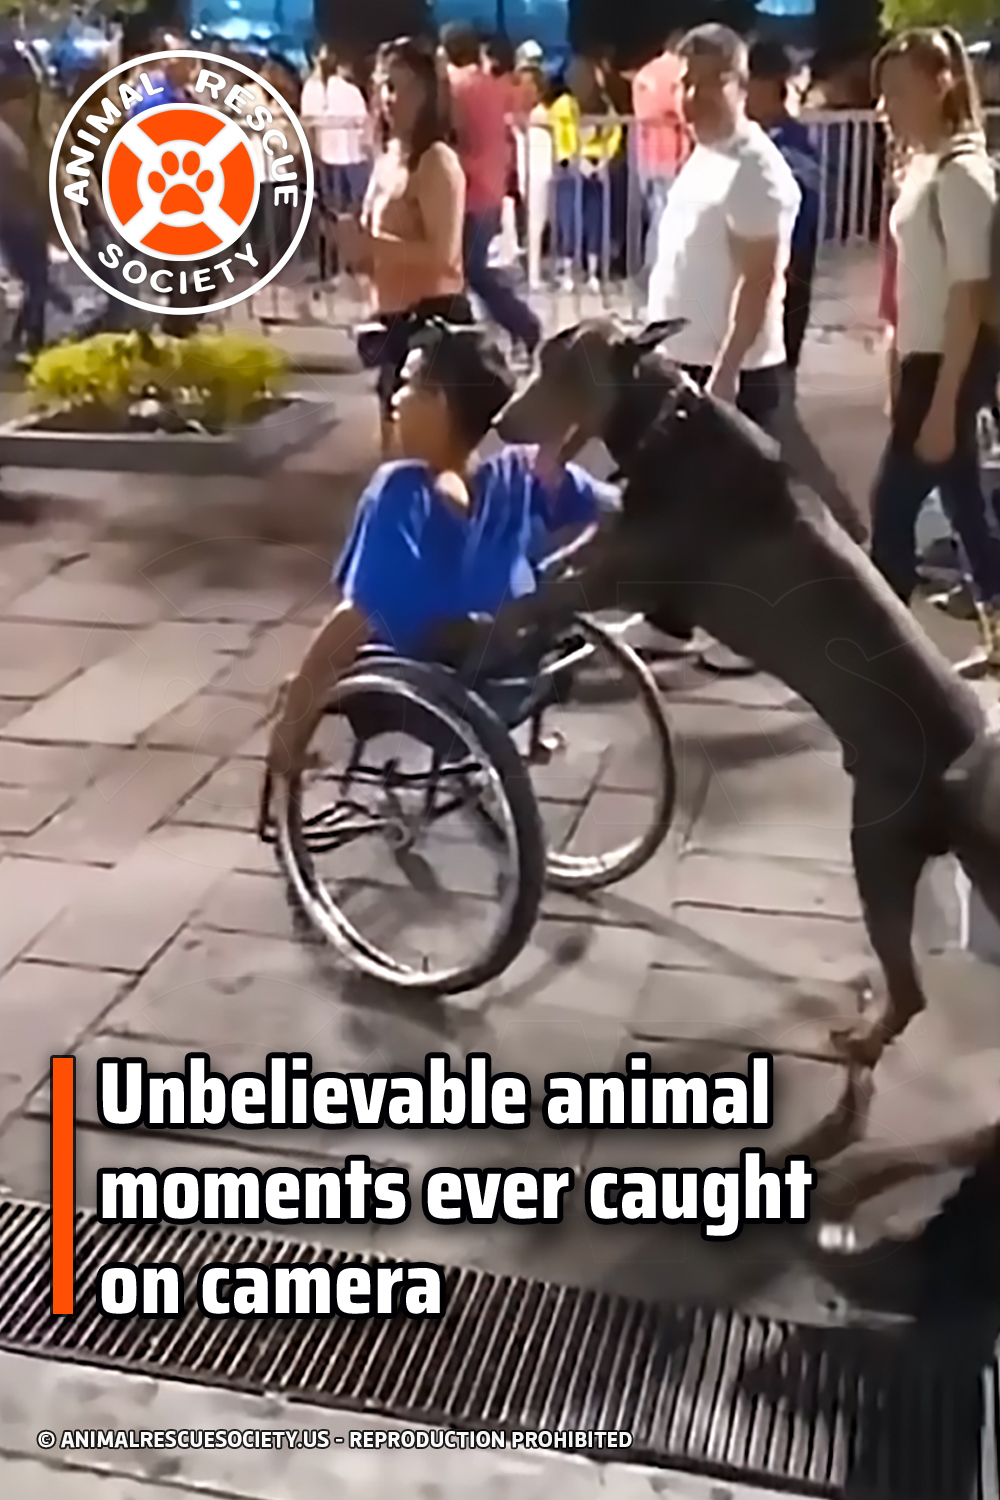 Unbelievable animal moments ever caught on camera